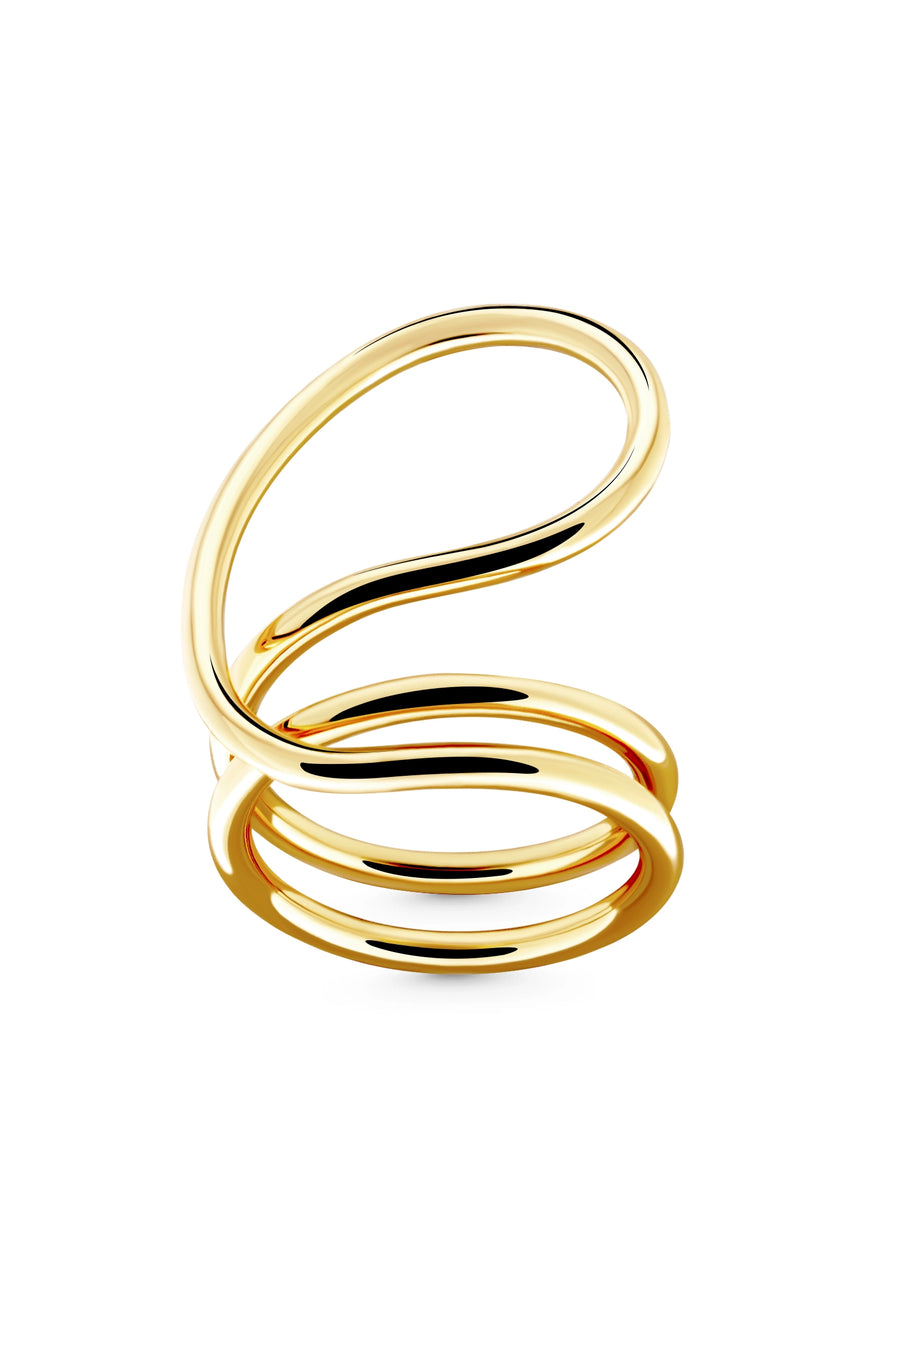 SAGE Ring. Ring made of coils of line with extended loop, size US7, 18K gold vermeil, handmade, hypoallergenic, water-resistant